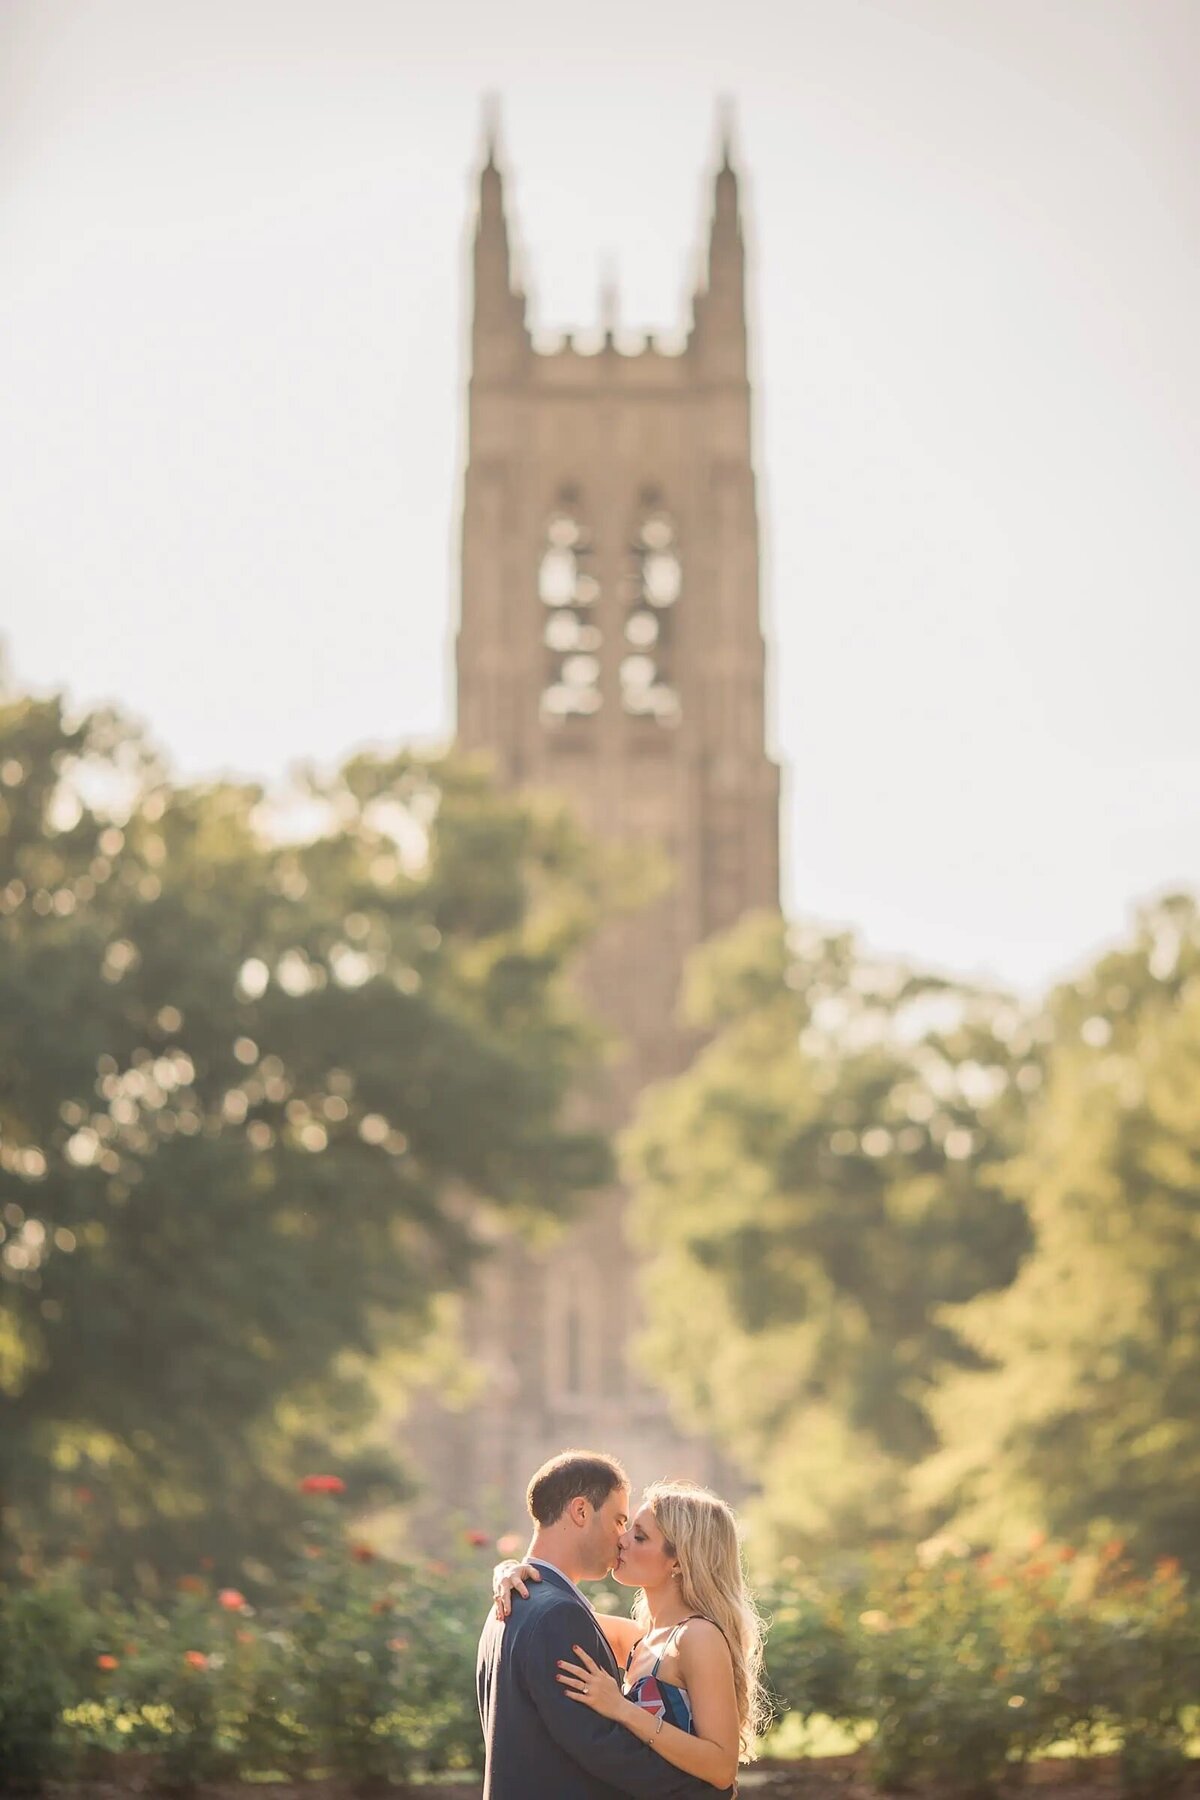 A couple kissing in the foreground with the blurry spire of a gothic cathedral in the background.